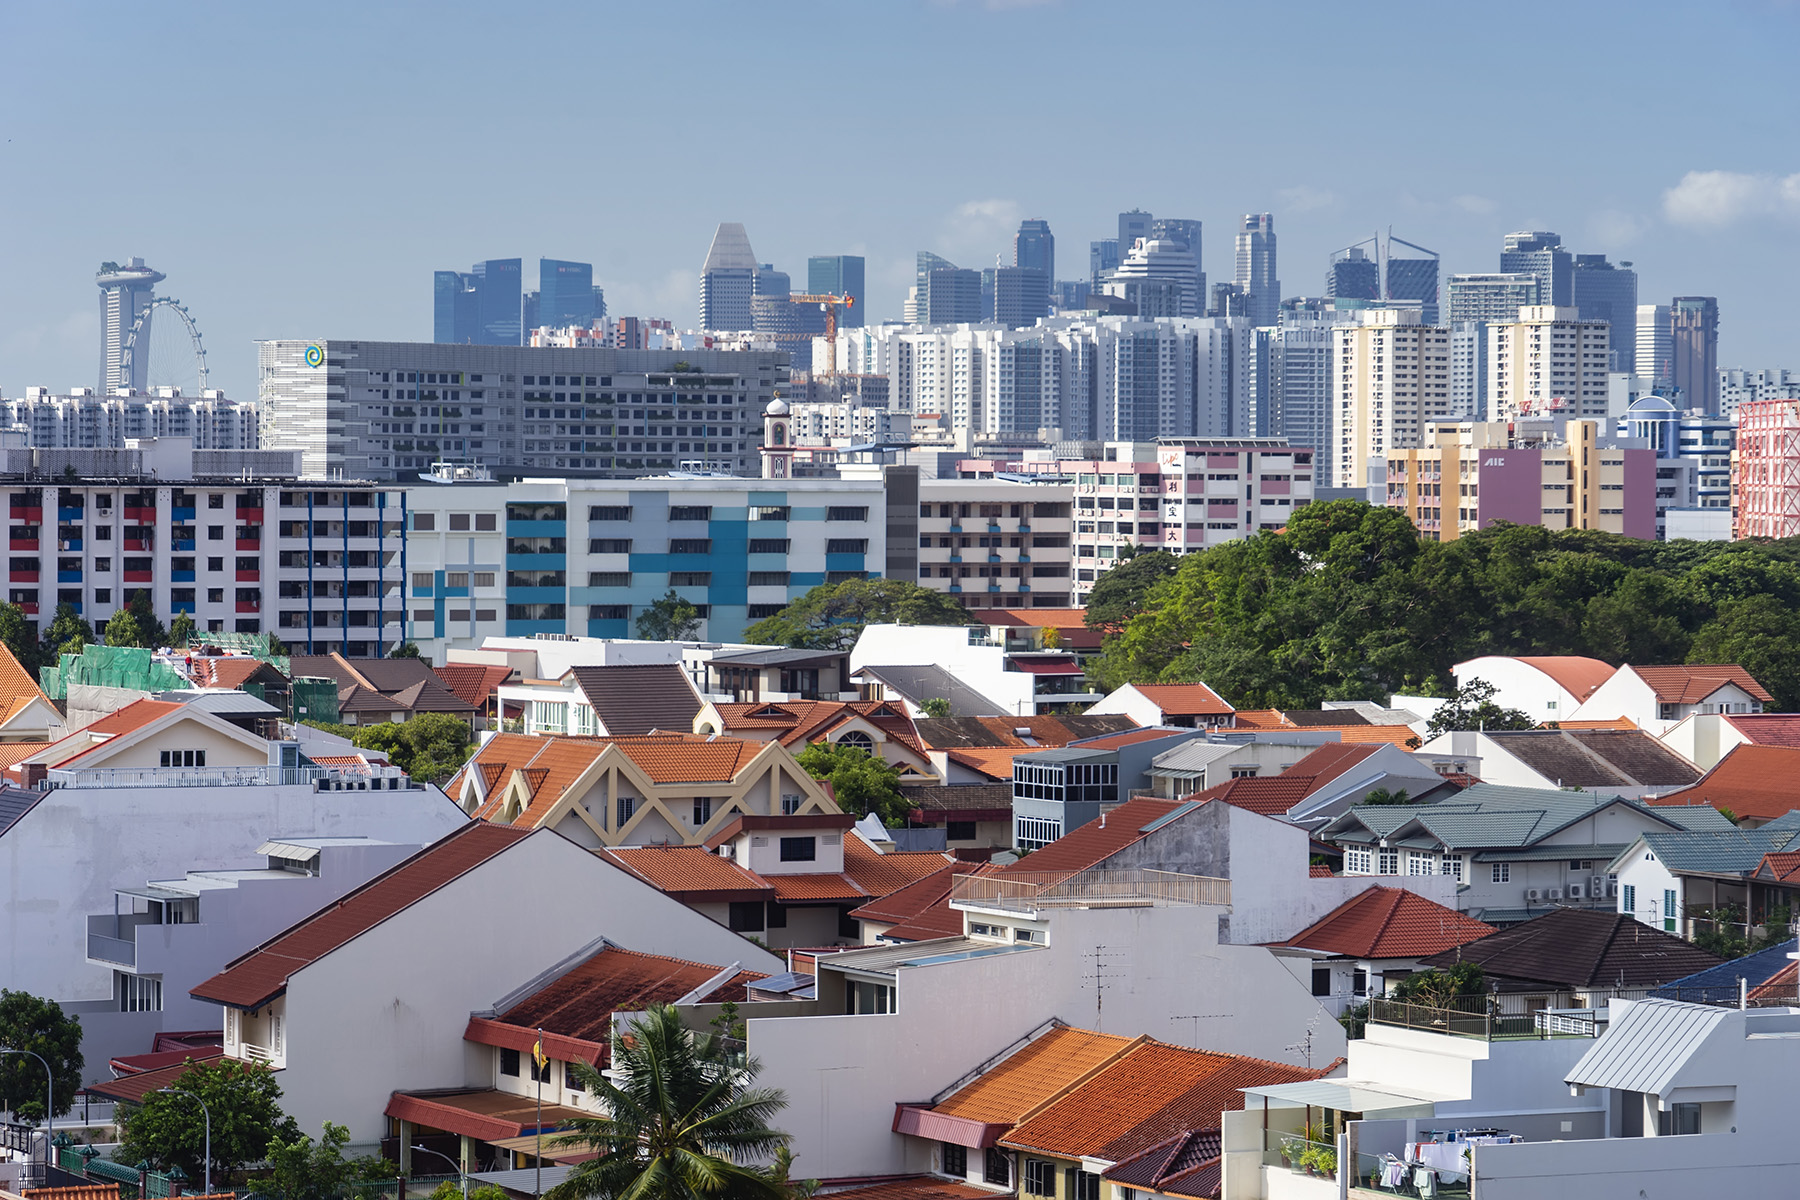 Houses, HDB apartment blocks, and office buildings loom large on the Singapore skyline.